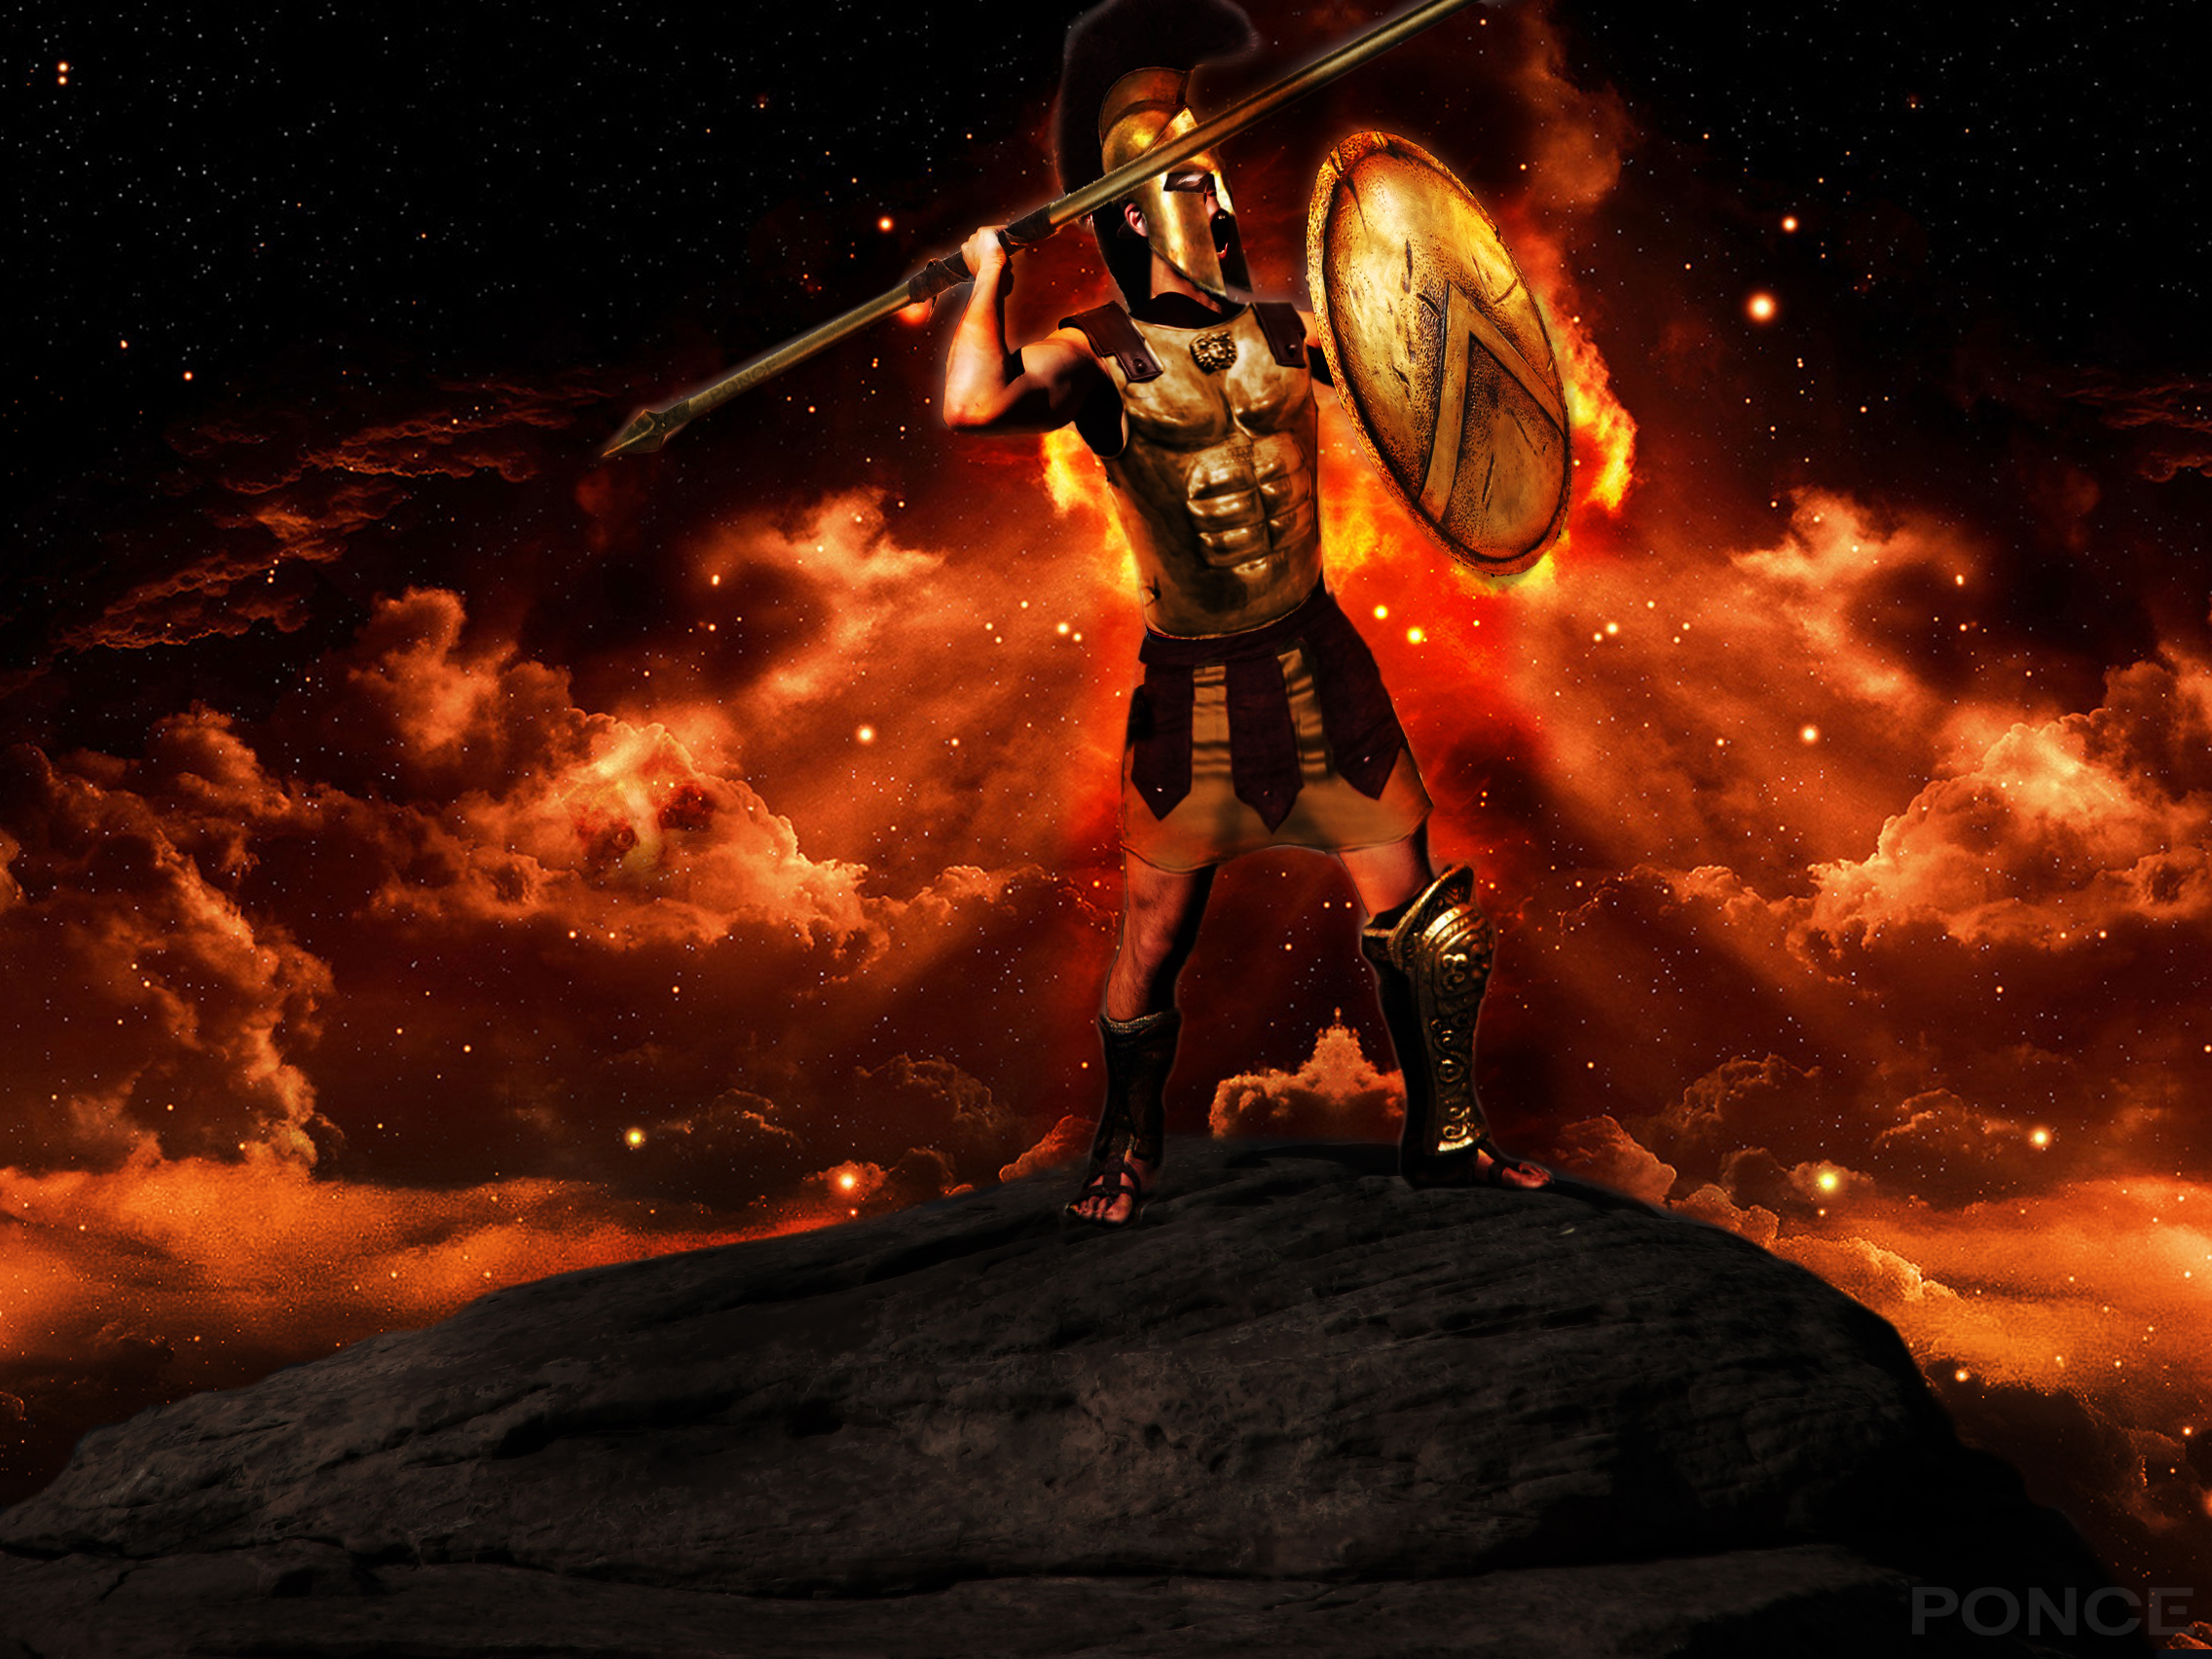 Ares The God of War by nahdawg on